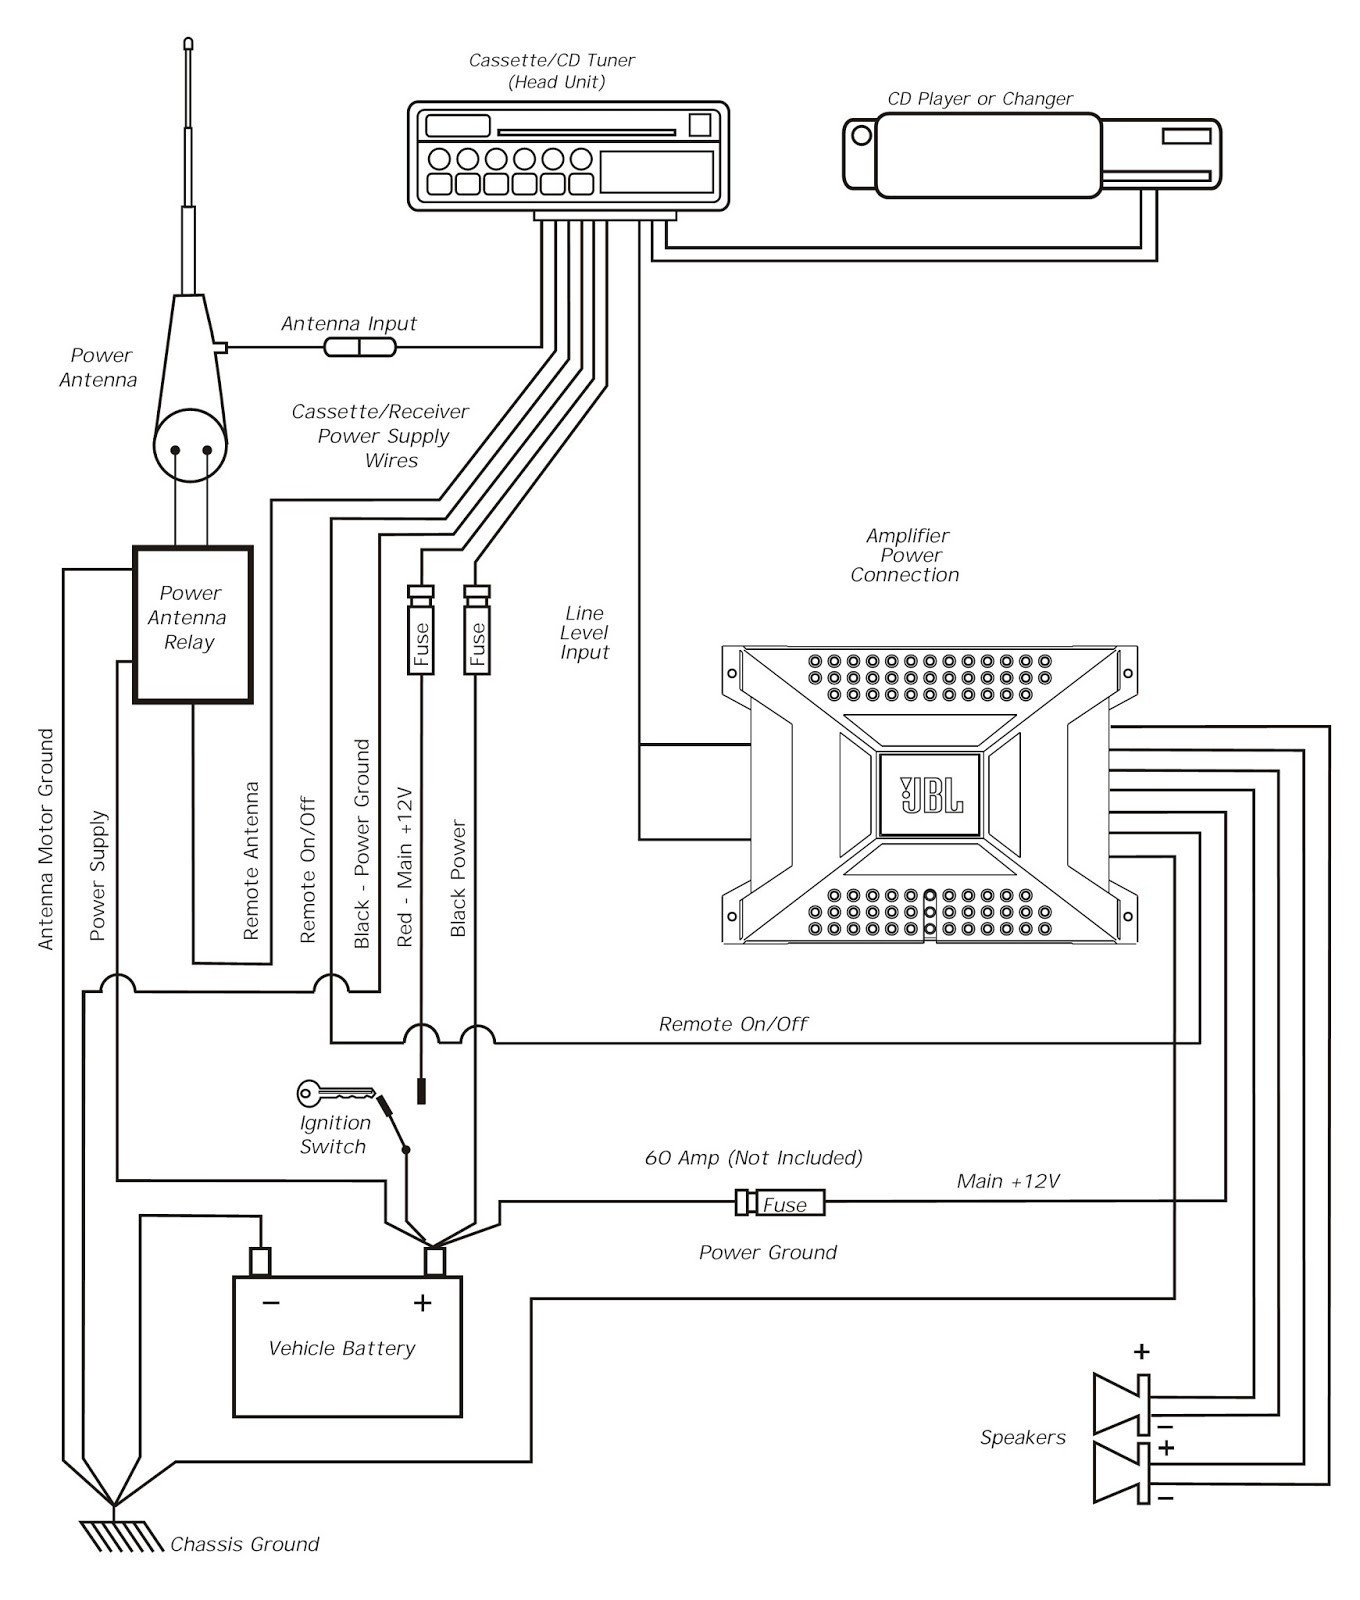 Diagram For Pioneer Car Pioneer Car Stereo Wiring New Light Rx Lovely Car Stereo Wiring S 0d – Wiring